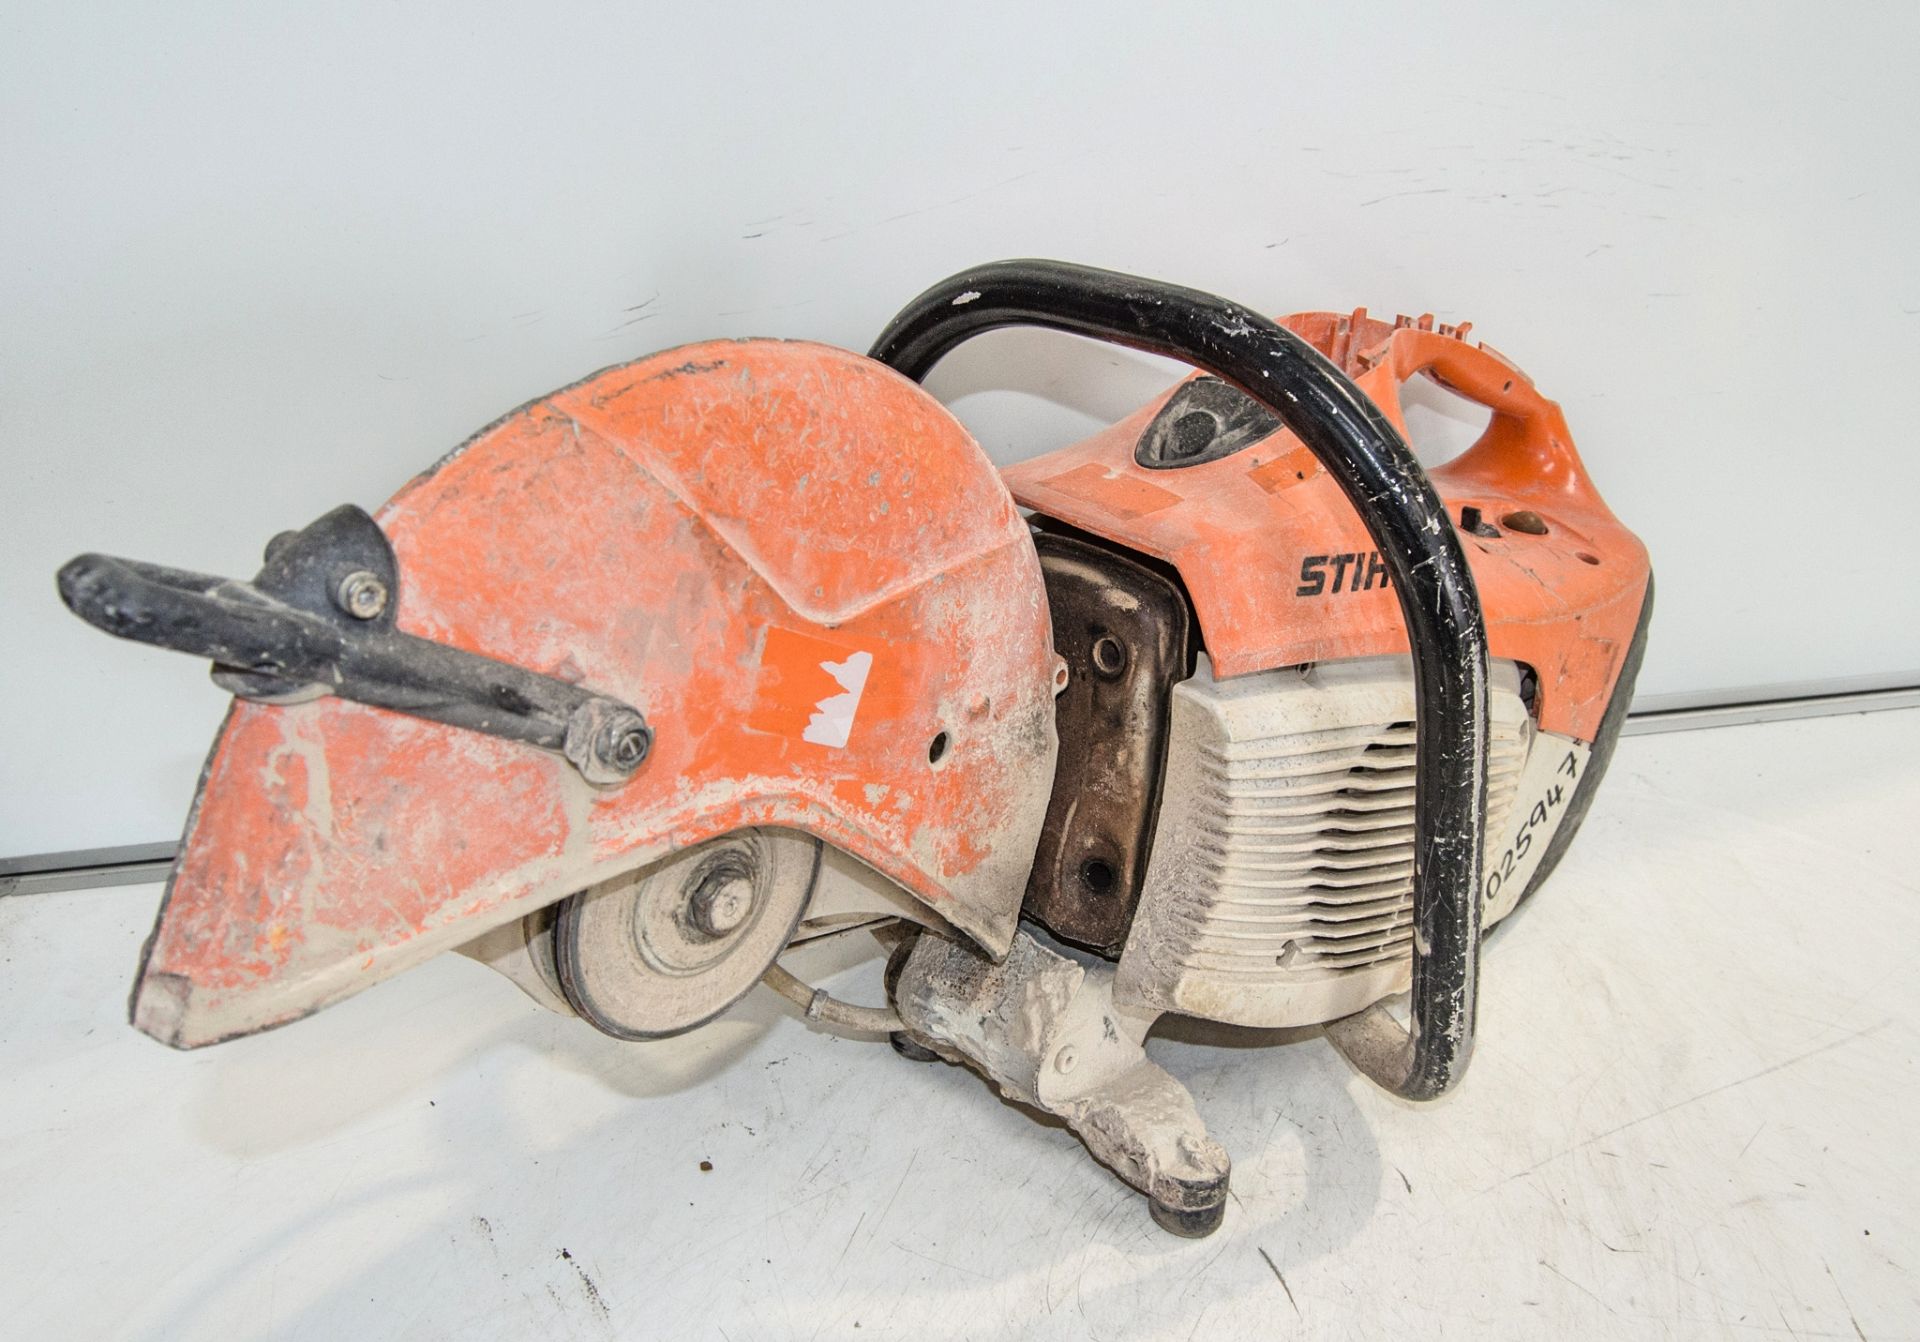 Stihl TS410 petrol driven cut off saw ** Pull cord assembly and handle parts missing ** 19025947